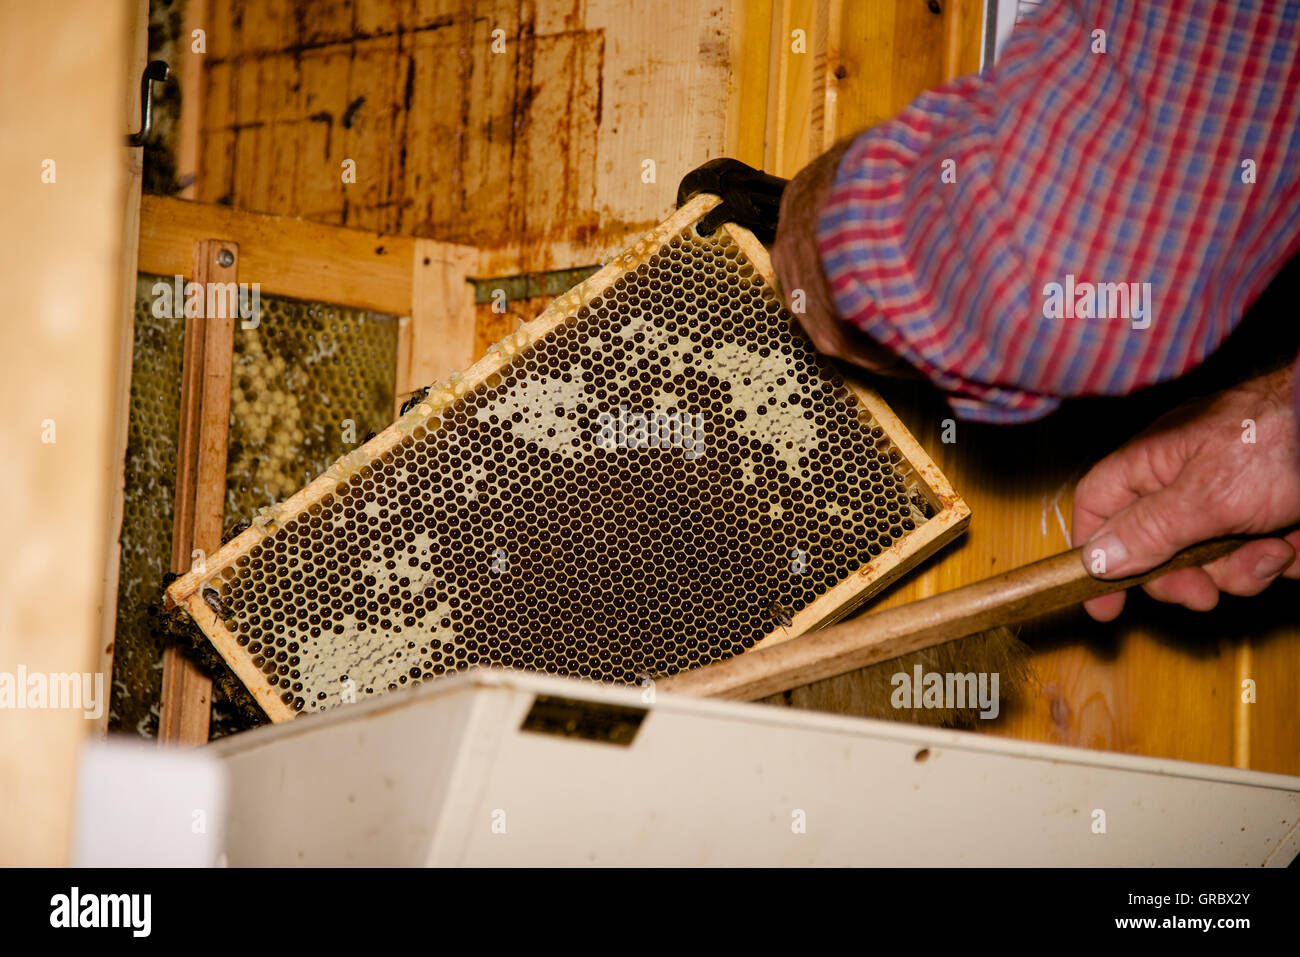 Apiarist Removing Frame With Stuffed But Mostly Uncapped Honeycomb From Beehive Stock Photo